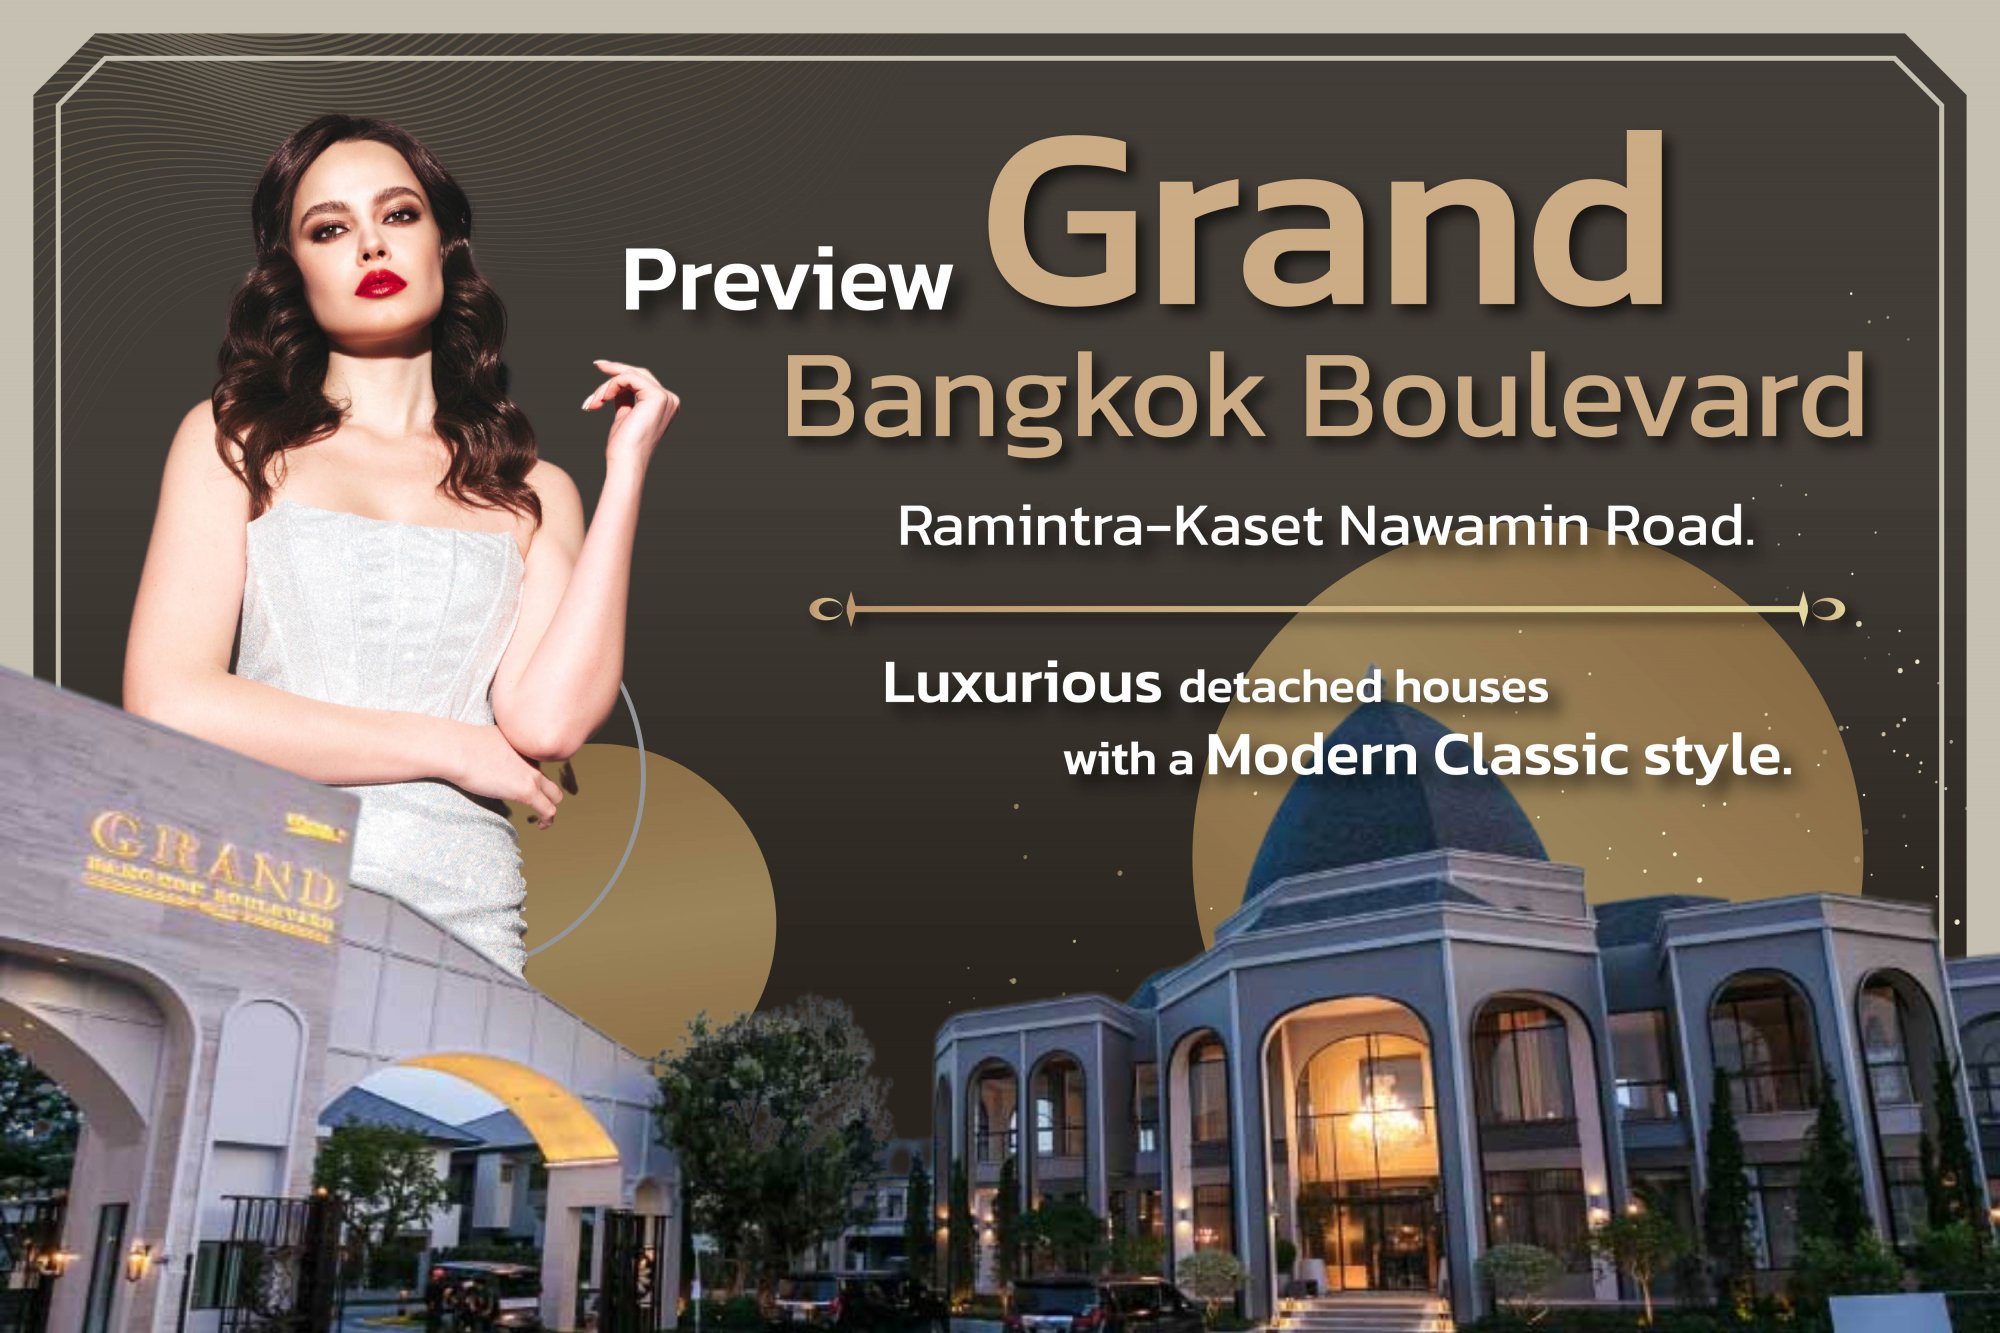 image for Preview of Grand Bangkok Boulevard, Ram Inthra - Kaset Nawamin. Luxurious detached houses with a Modern Classic style.